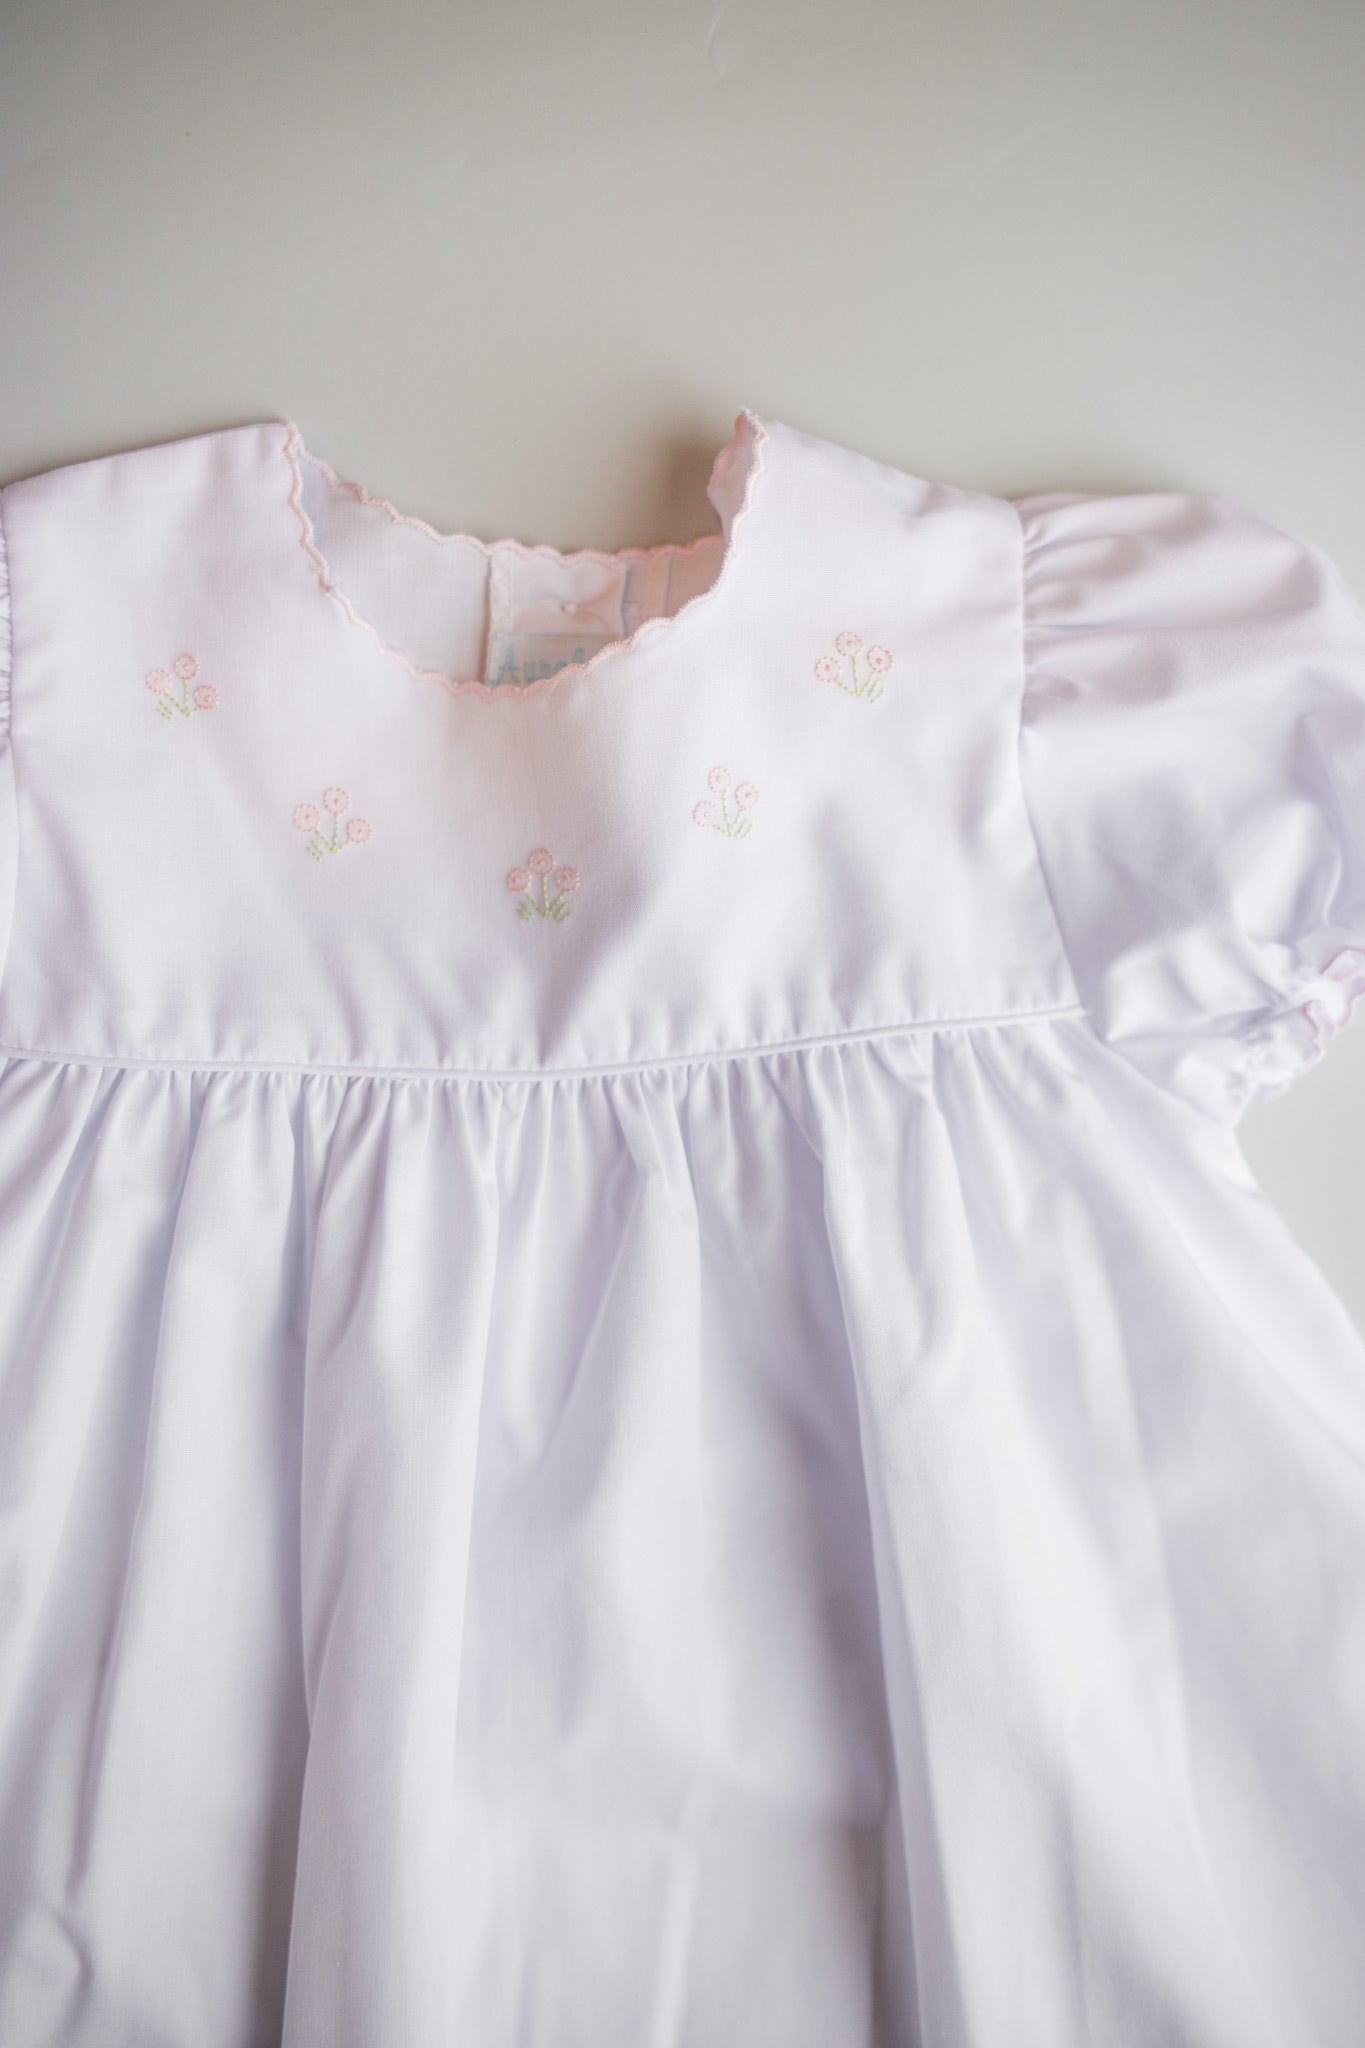 Phoebe Bunny & Flower Embroidered Girl's Dress | Pink/White